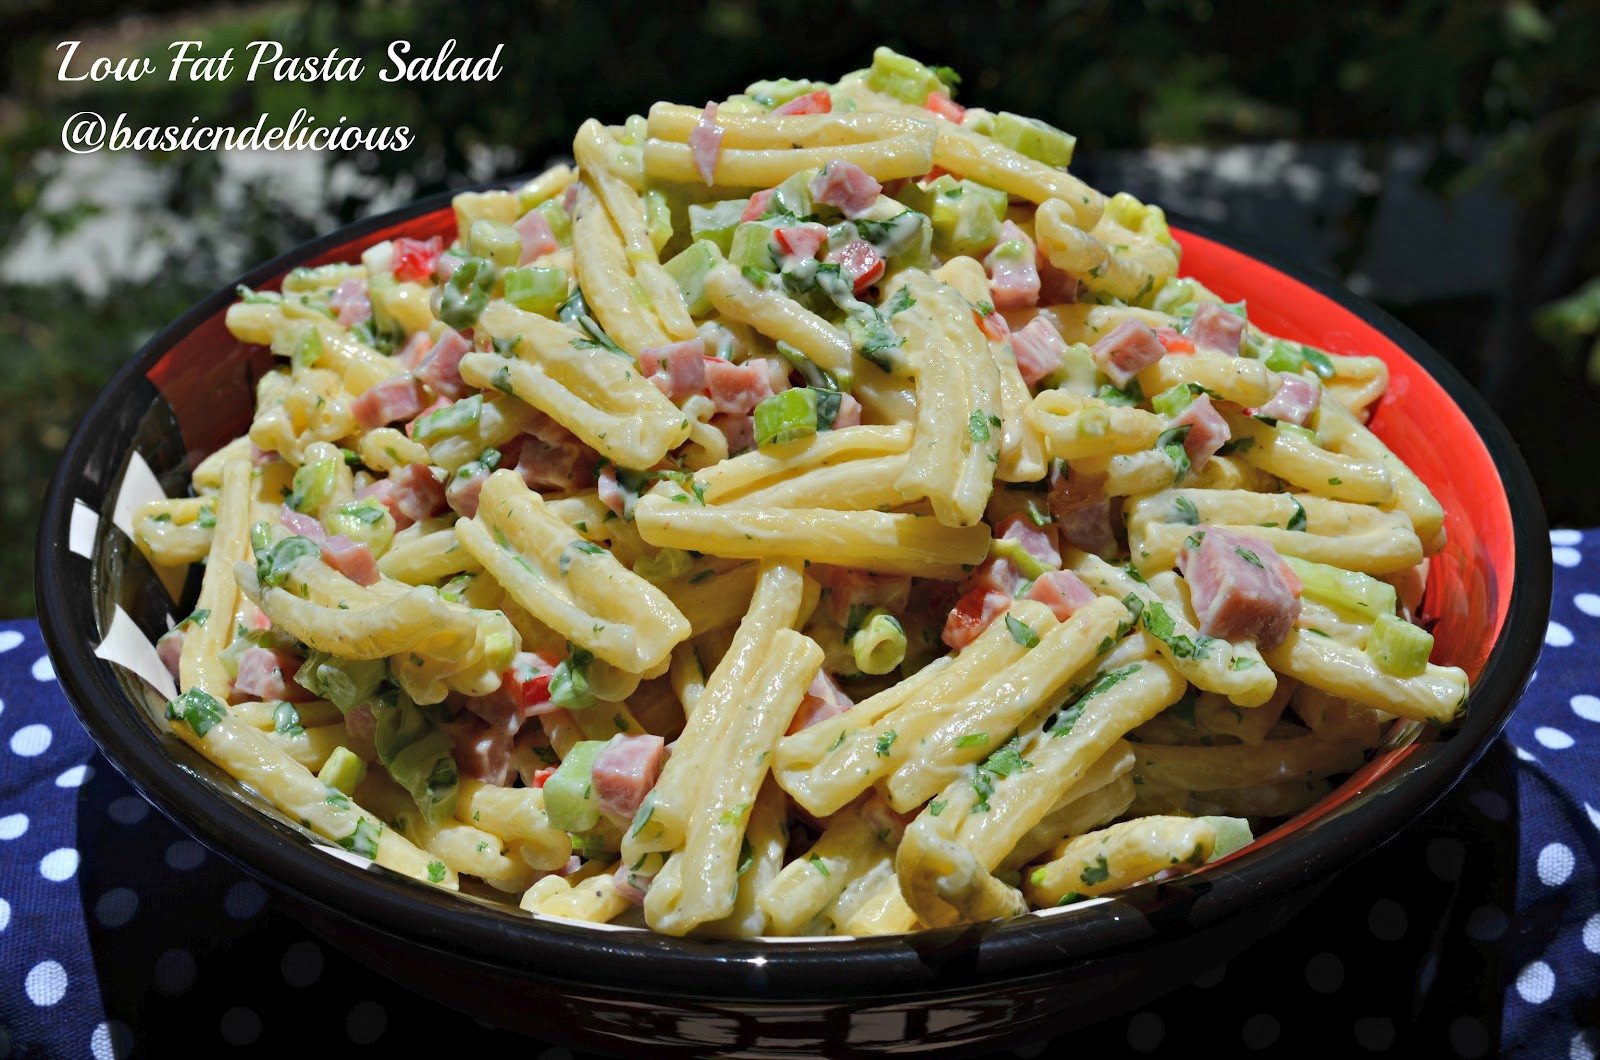 Low Calorie Pasta Salad Recipes
 BASIC N DELICIOUS LOW FAT PASTA SALAD 4th OF JULY